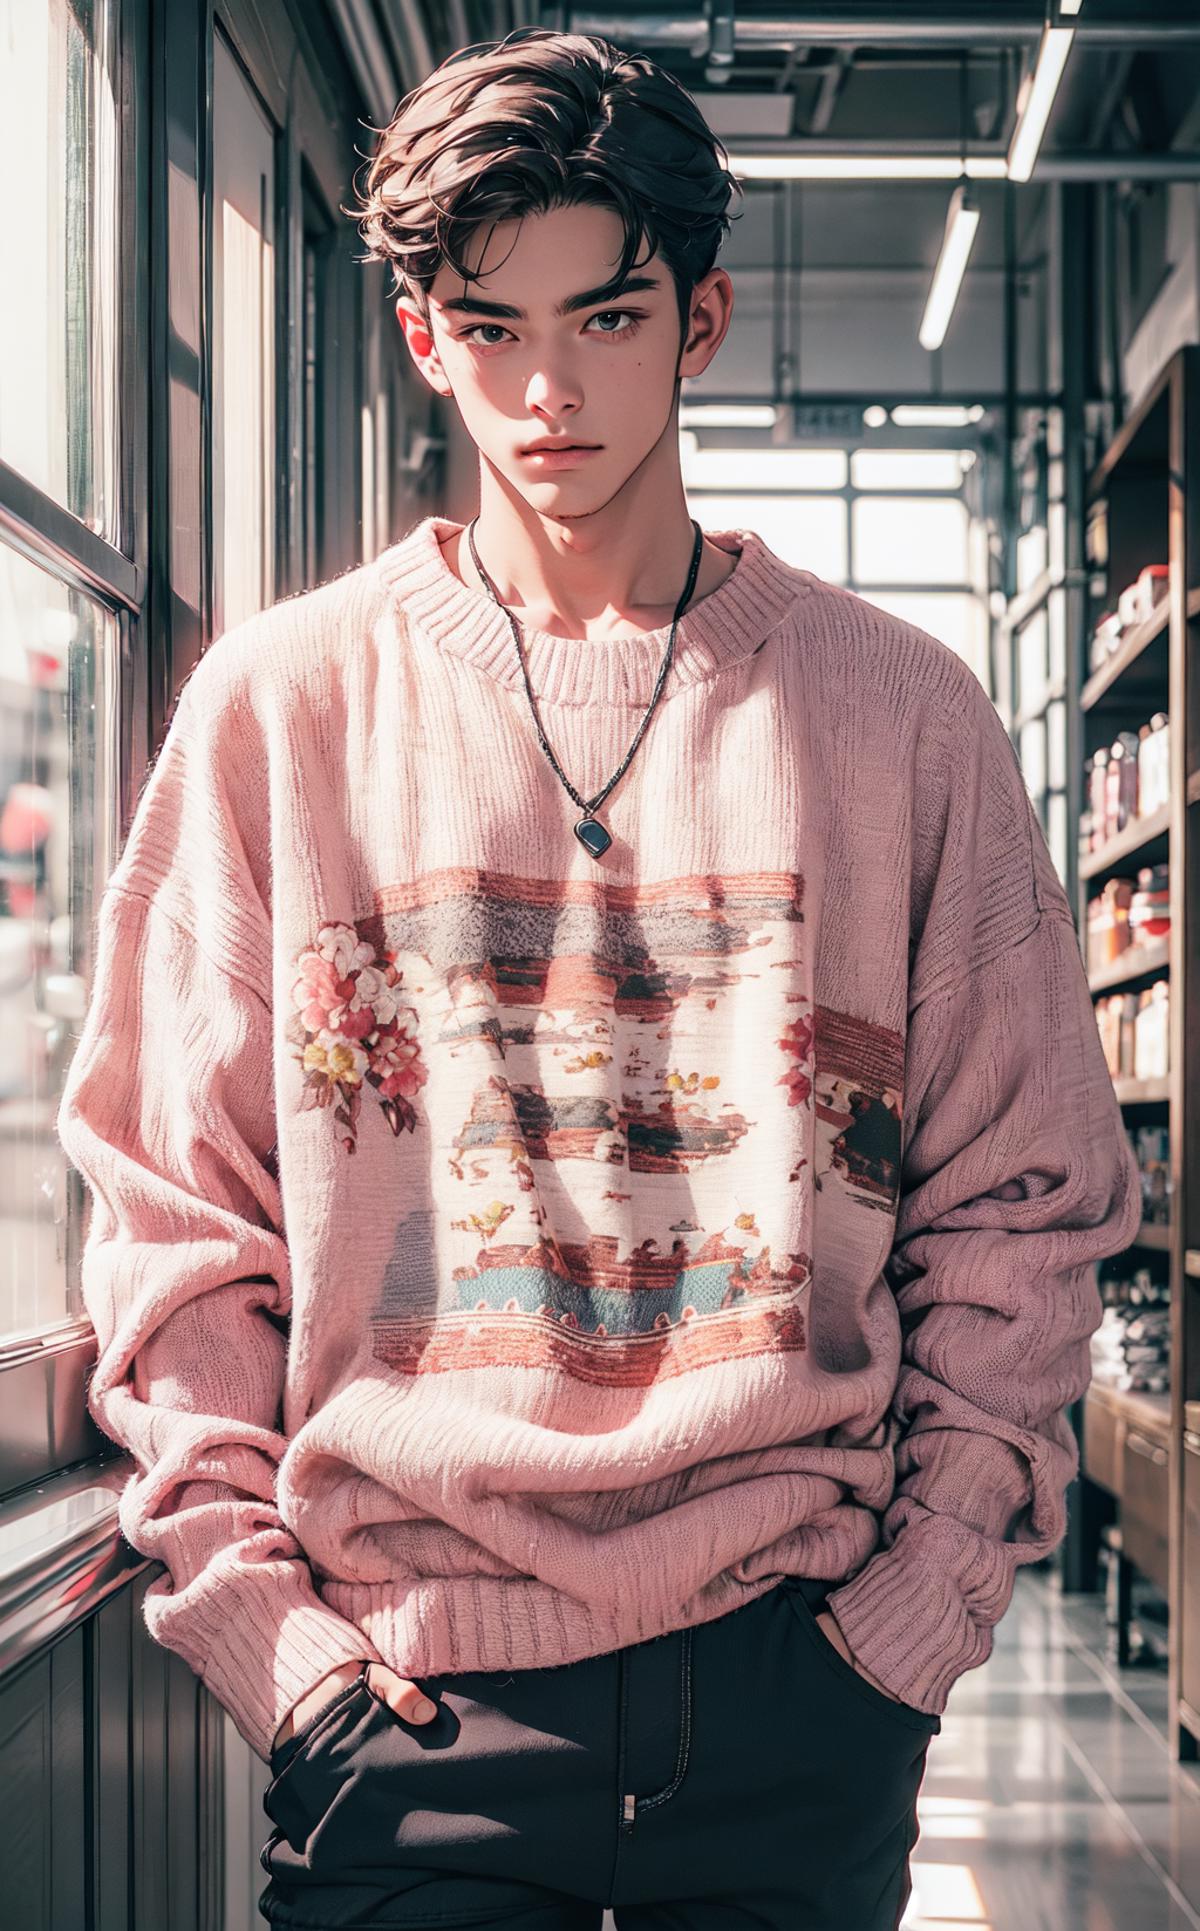 A young man wearing a pink sweater with a necklace stands in front of a bookcase.